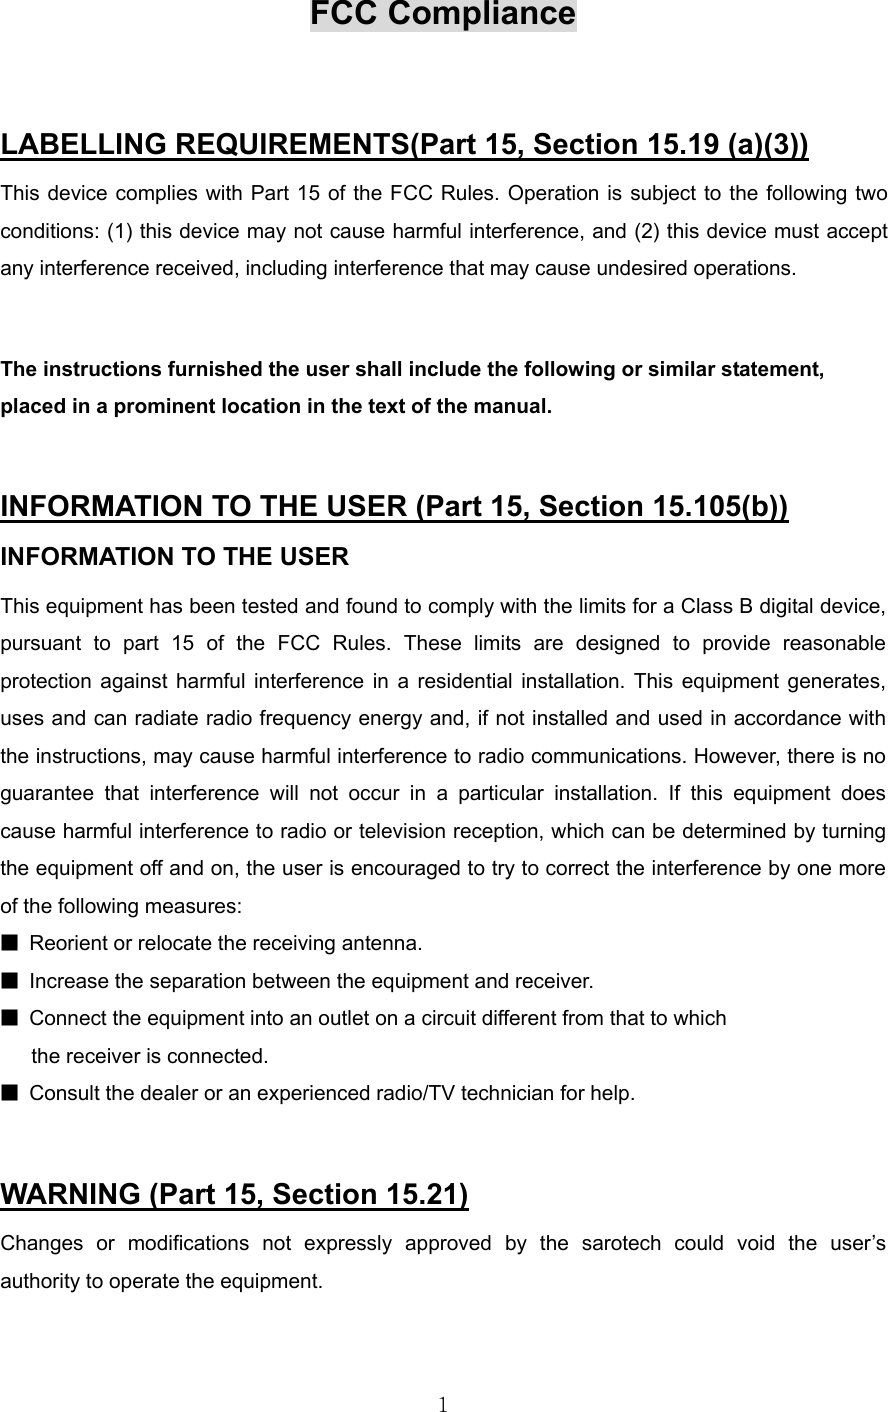  1FCC Compliance  LABELLING REQUIREMENTS(Part 15, Section 15.19 (a)(3)) This device complies with Part 15 of the FCC Rules. Operation is subject to the following two conditions: (1) this device may not cause harmful interference, and (2) this device must accept any interference received, including interference that may cause undesired operations.  The instructions furnished the user shall include the following or similar statement, placed in a prominent location in the text of the manual.  INFORMATION TO THE USER (Part 15, Section 15.105(b)) INFORMATION TO THE USER This equipment has been tested and found to comply with the limits for a Class B digital device, pursuant to part 15 of the FCC Rules. These limits are designed to provide reasonable protection against harmful interference in a residential installation. This equipment generates, uses and can radiate radio frequency energy and, if not installed and used in accordance with the instructions, may cause harmful interference to radio communications. However, there is no guarantee that interference will not occur in a particular installation. If this equipment does cause harmful interference to radio or television reception, which can be determined by turning the equipment off and on, the user is encouraged to try to correct the interference by one more of the following measures: ■  Reorient or relocate the receiving antenna. ■  Increase the separation between the equipment and receiver. ■  Connect the equipment into an outlet on a circuit different from that to which      the receiver is connected. ■  Consult the dealer or an experienced radio/TV technician for help.  WARNING (Part 15, Section 15.21) Changes or modifications not expressly approved by the sarotech could void the user’s authority to operate the equipment.  